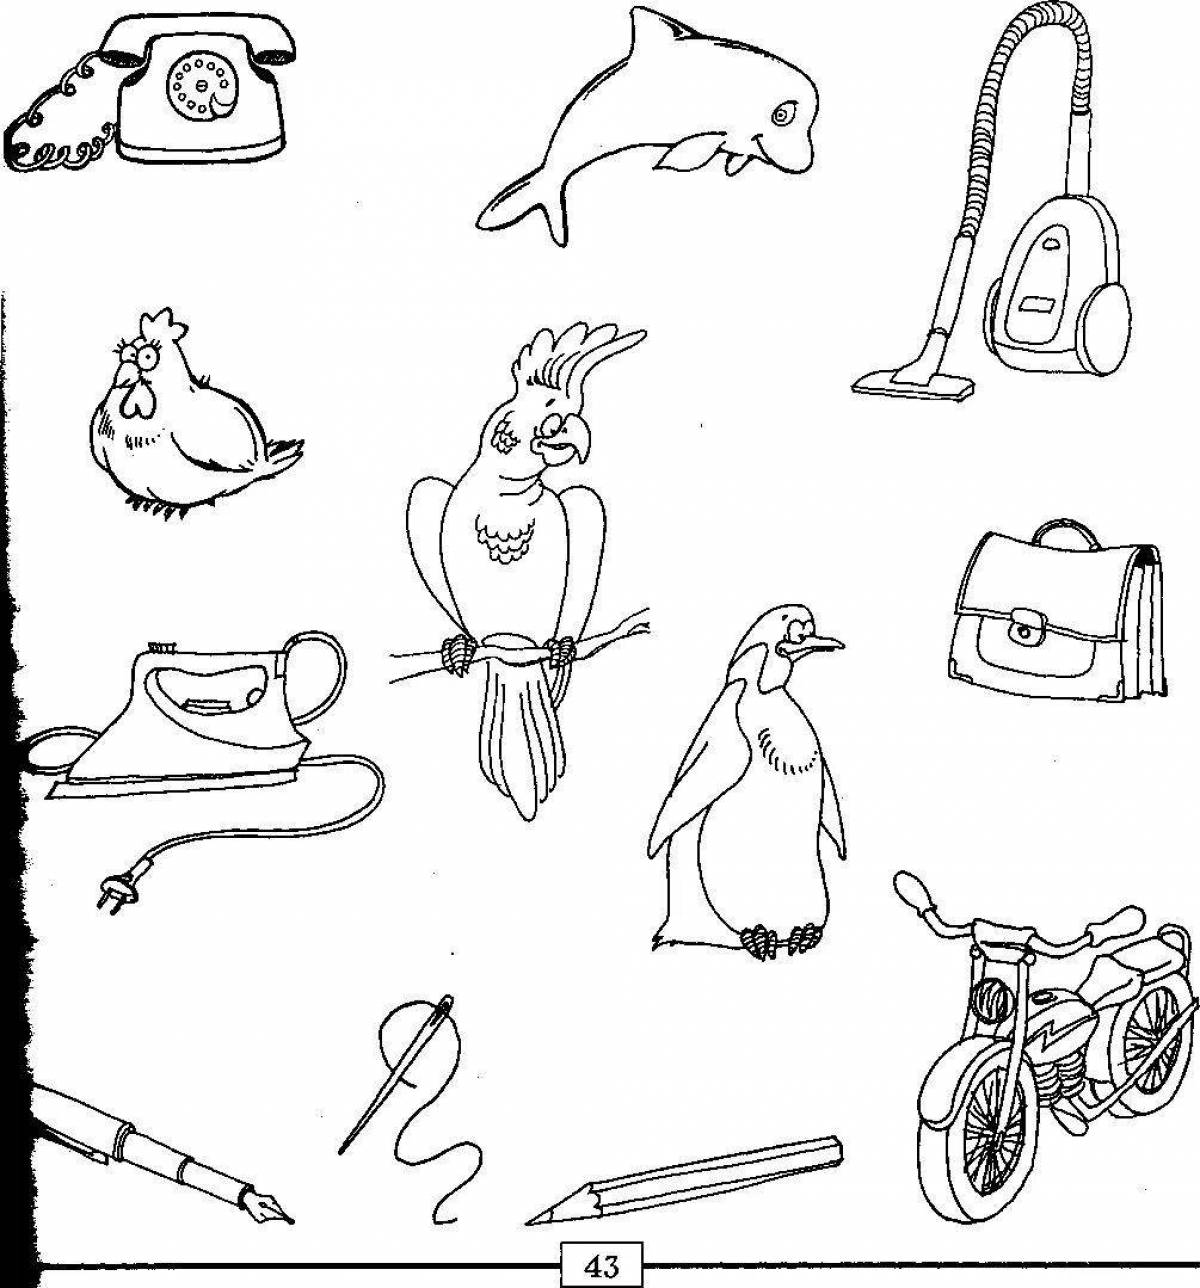 Living wildlife coloring pages for kids